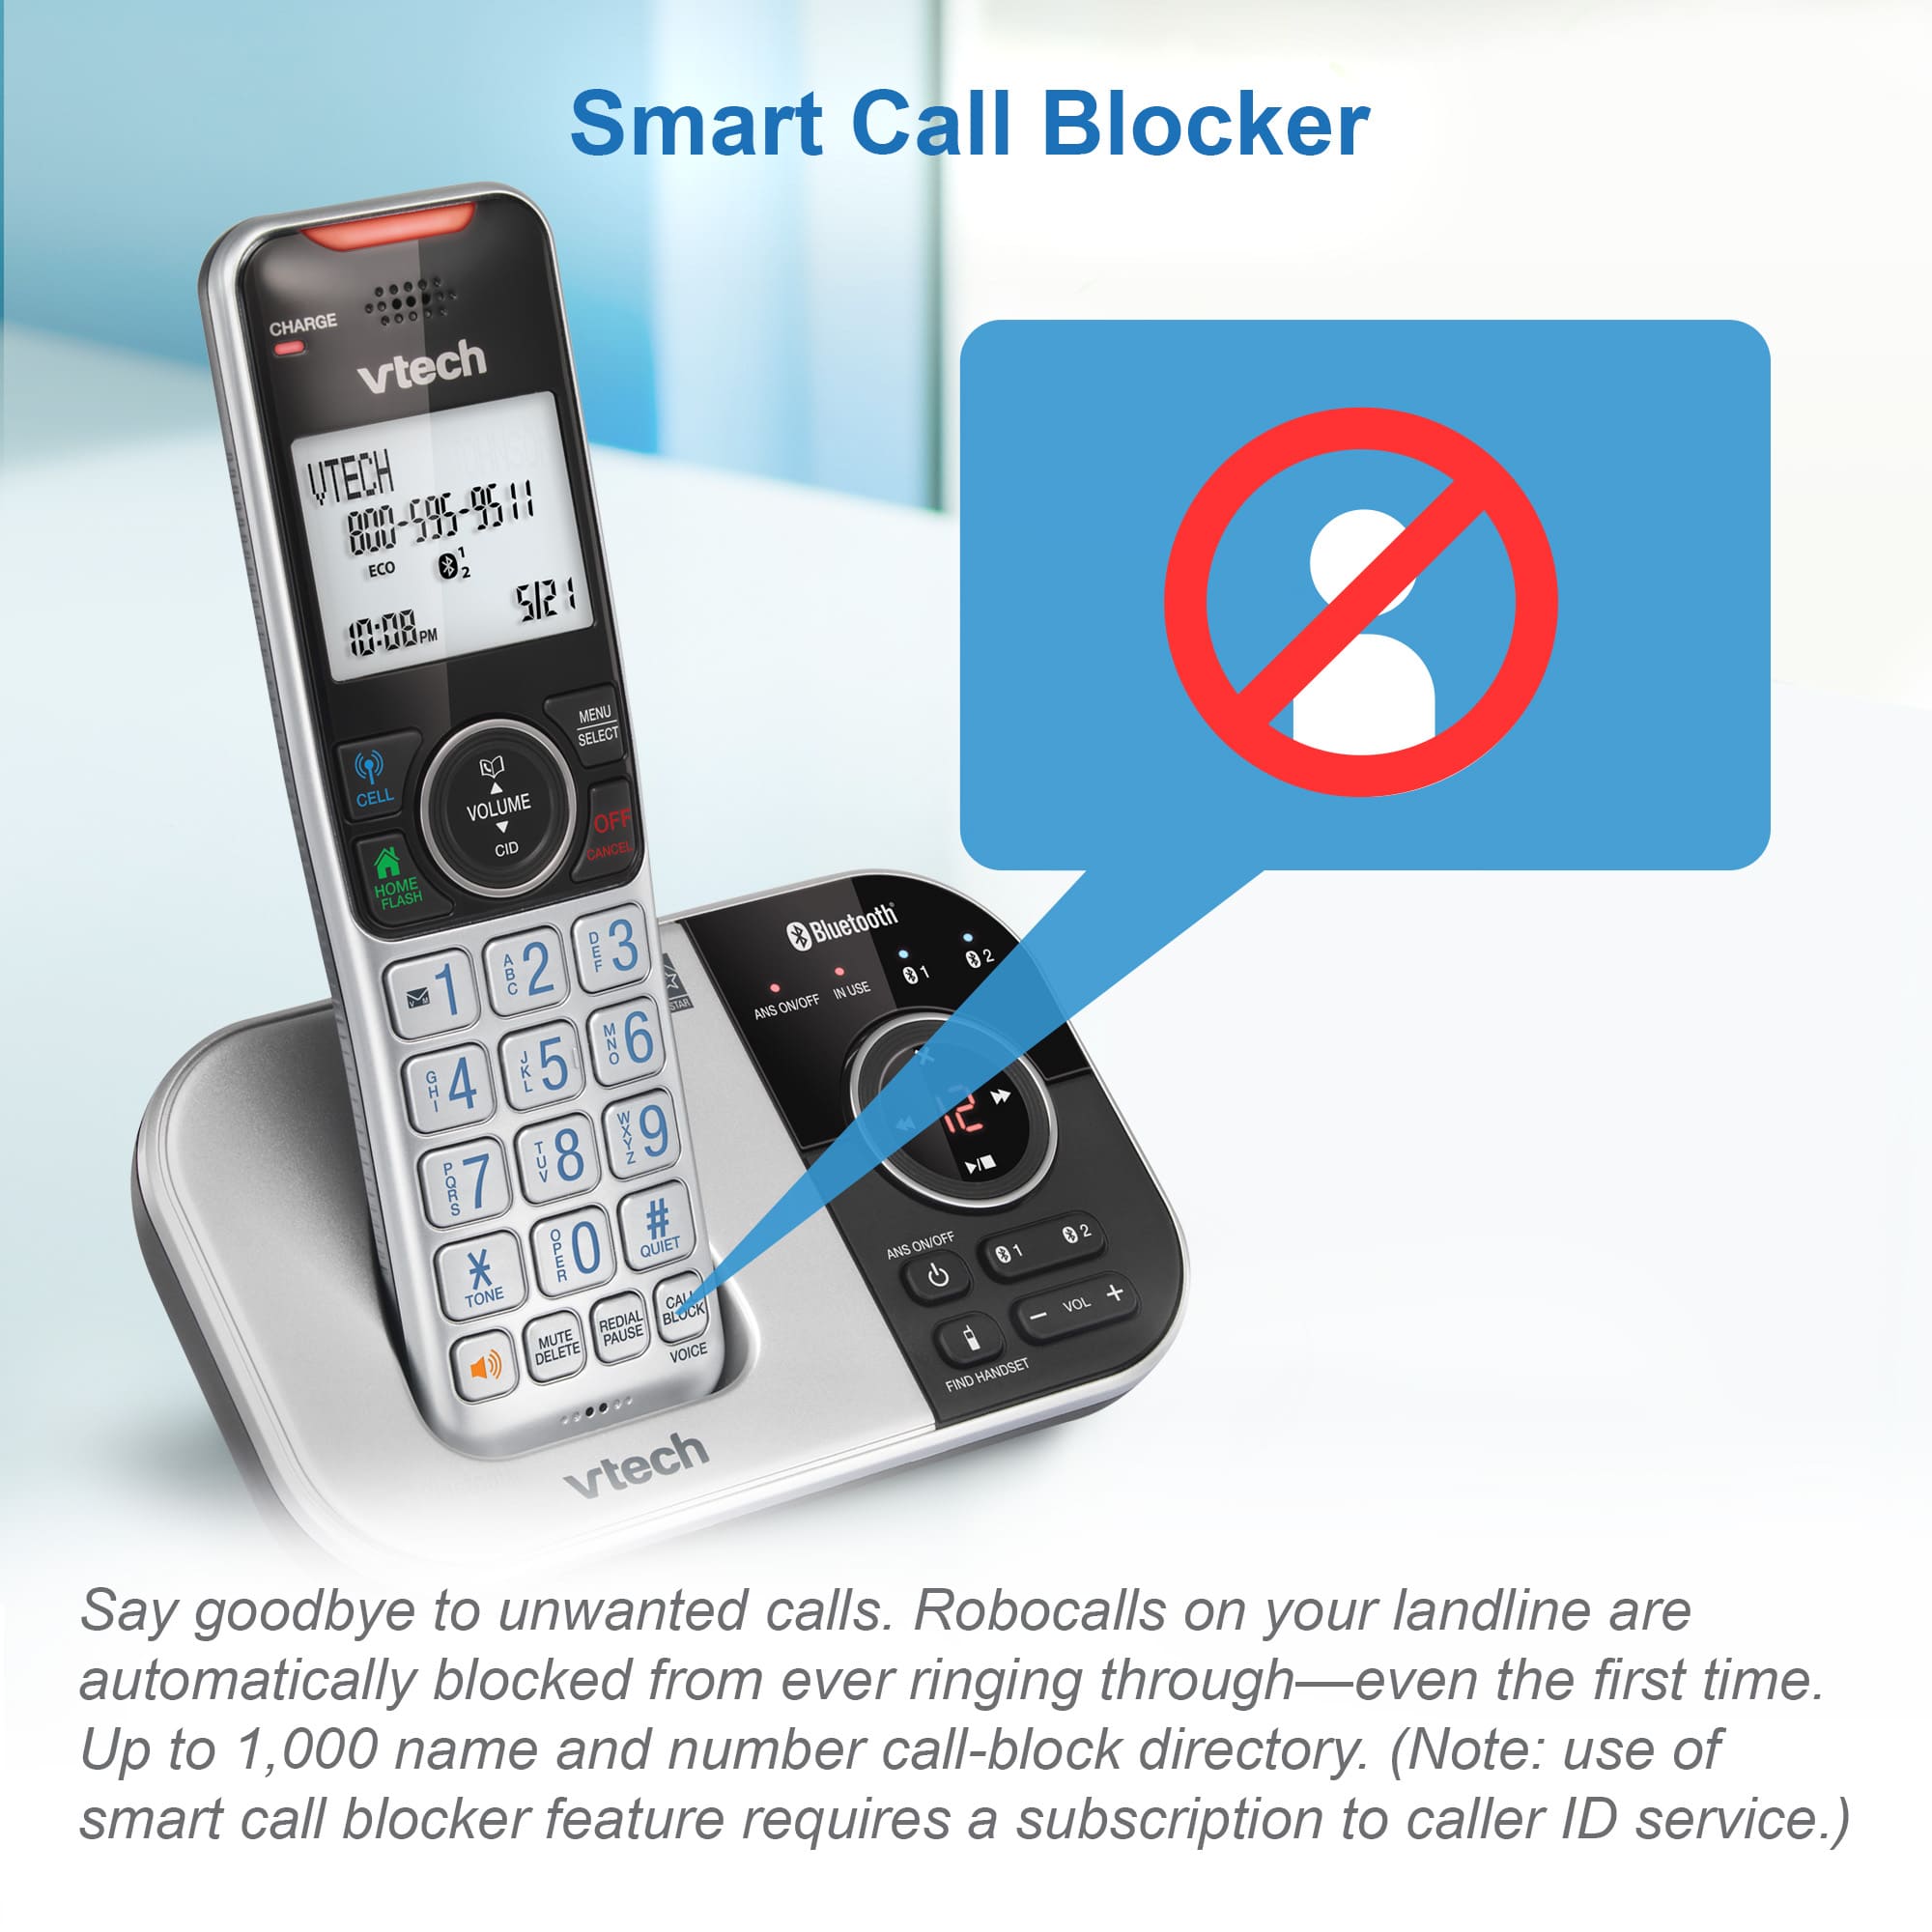 4-Handset Expandable Cordless Phone with Bluetooth Connect to Cell, Smart Call Blocker and Answering System (Silver & Black) - view 5